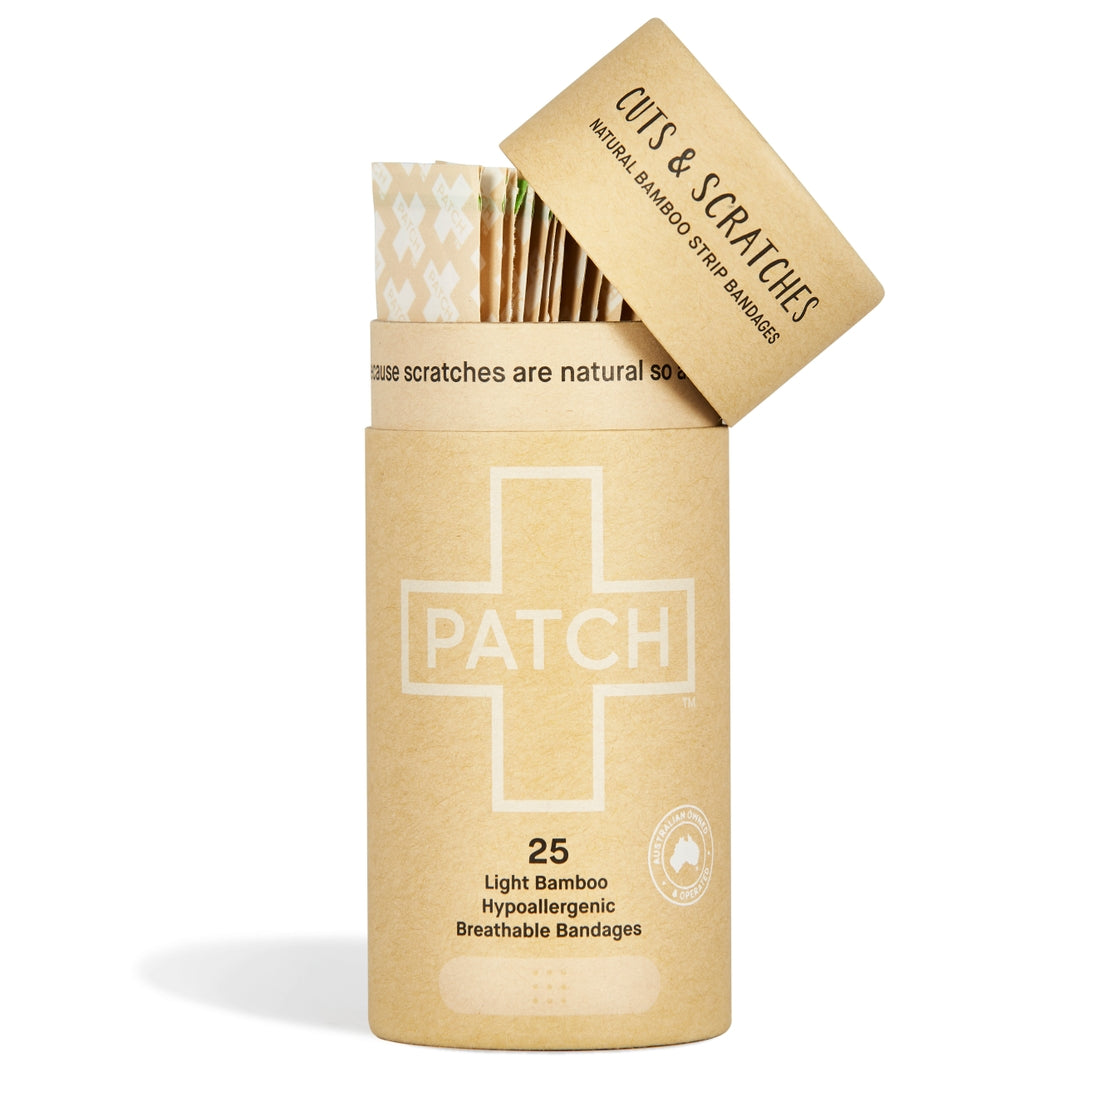 Patch Bamboo Bandages Natural Bamboo Adhesive Strips Light Bamboo Hypoallergenic Eco Bandages